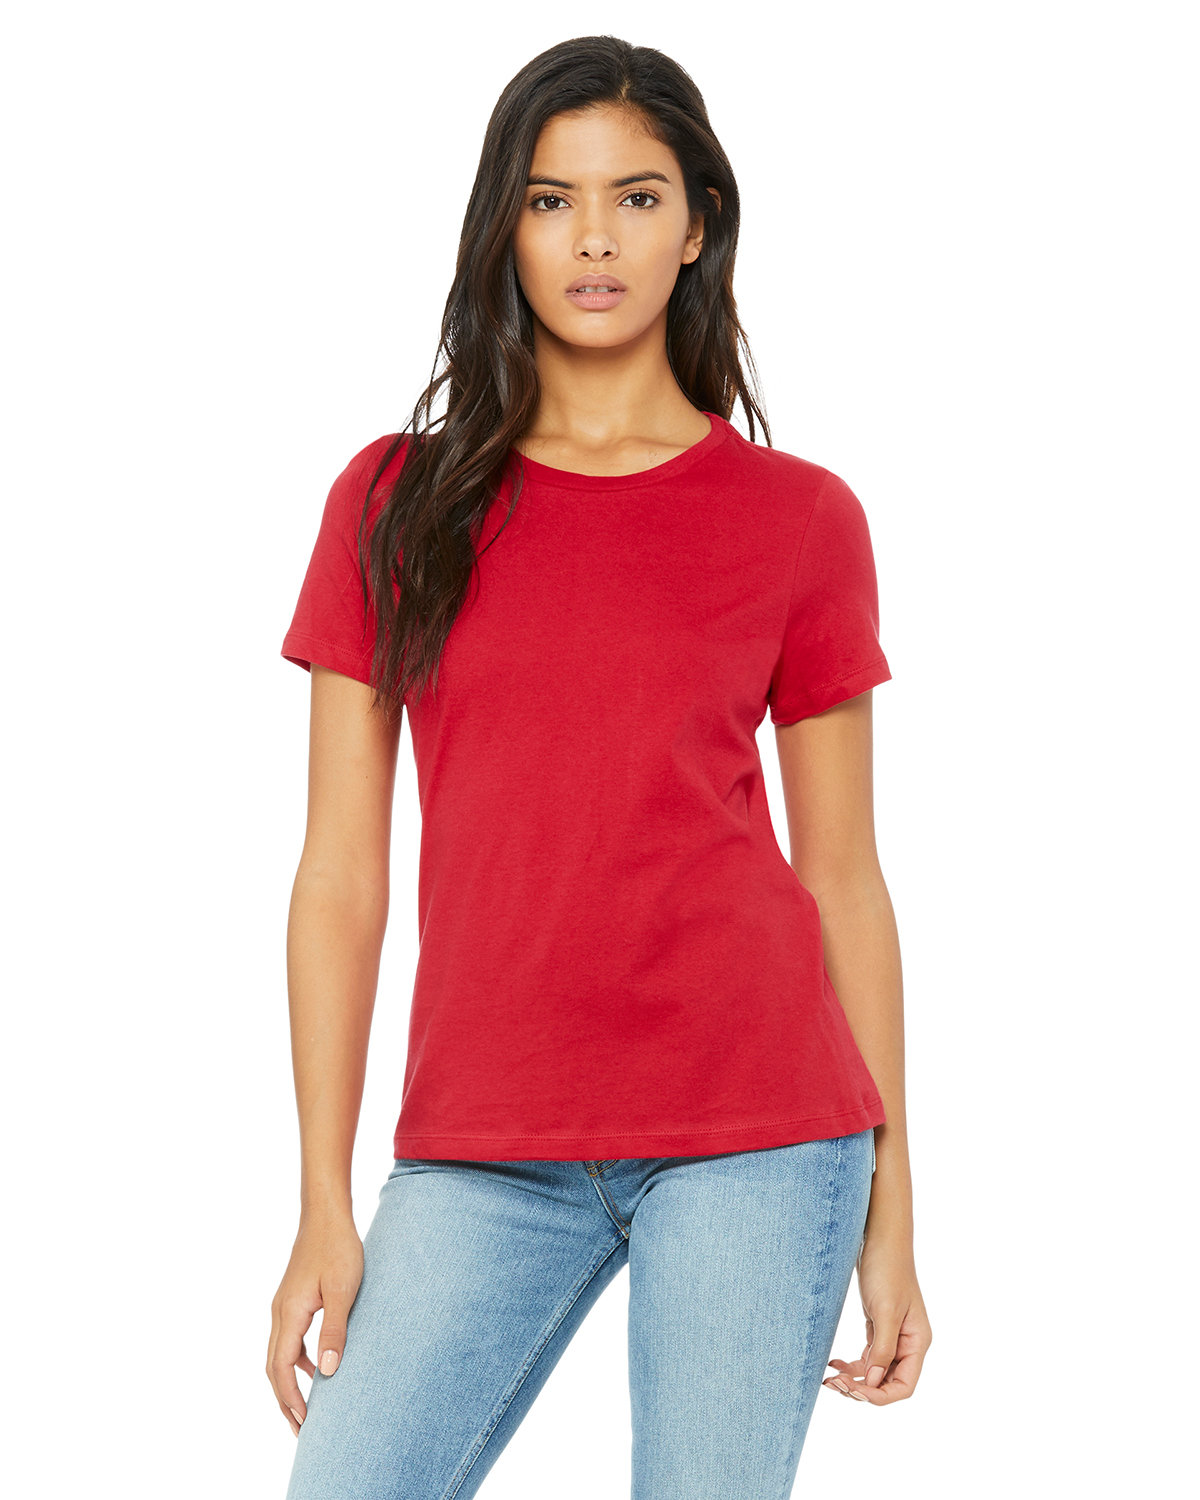 Bella + Canvas Ladies' Relaxed Jersey Short-Sleeve T-Shirt RED 